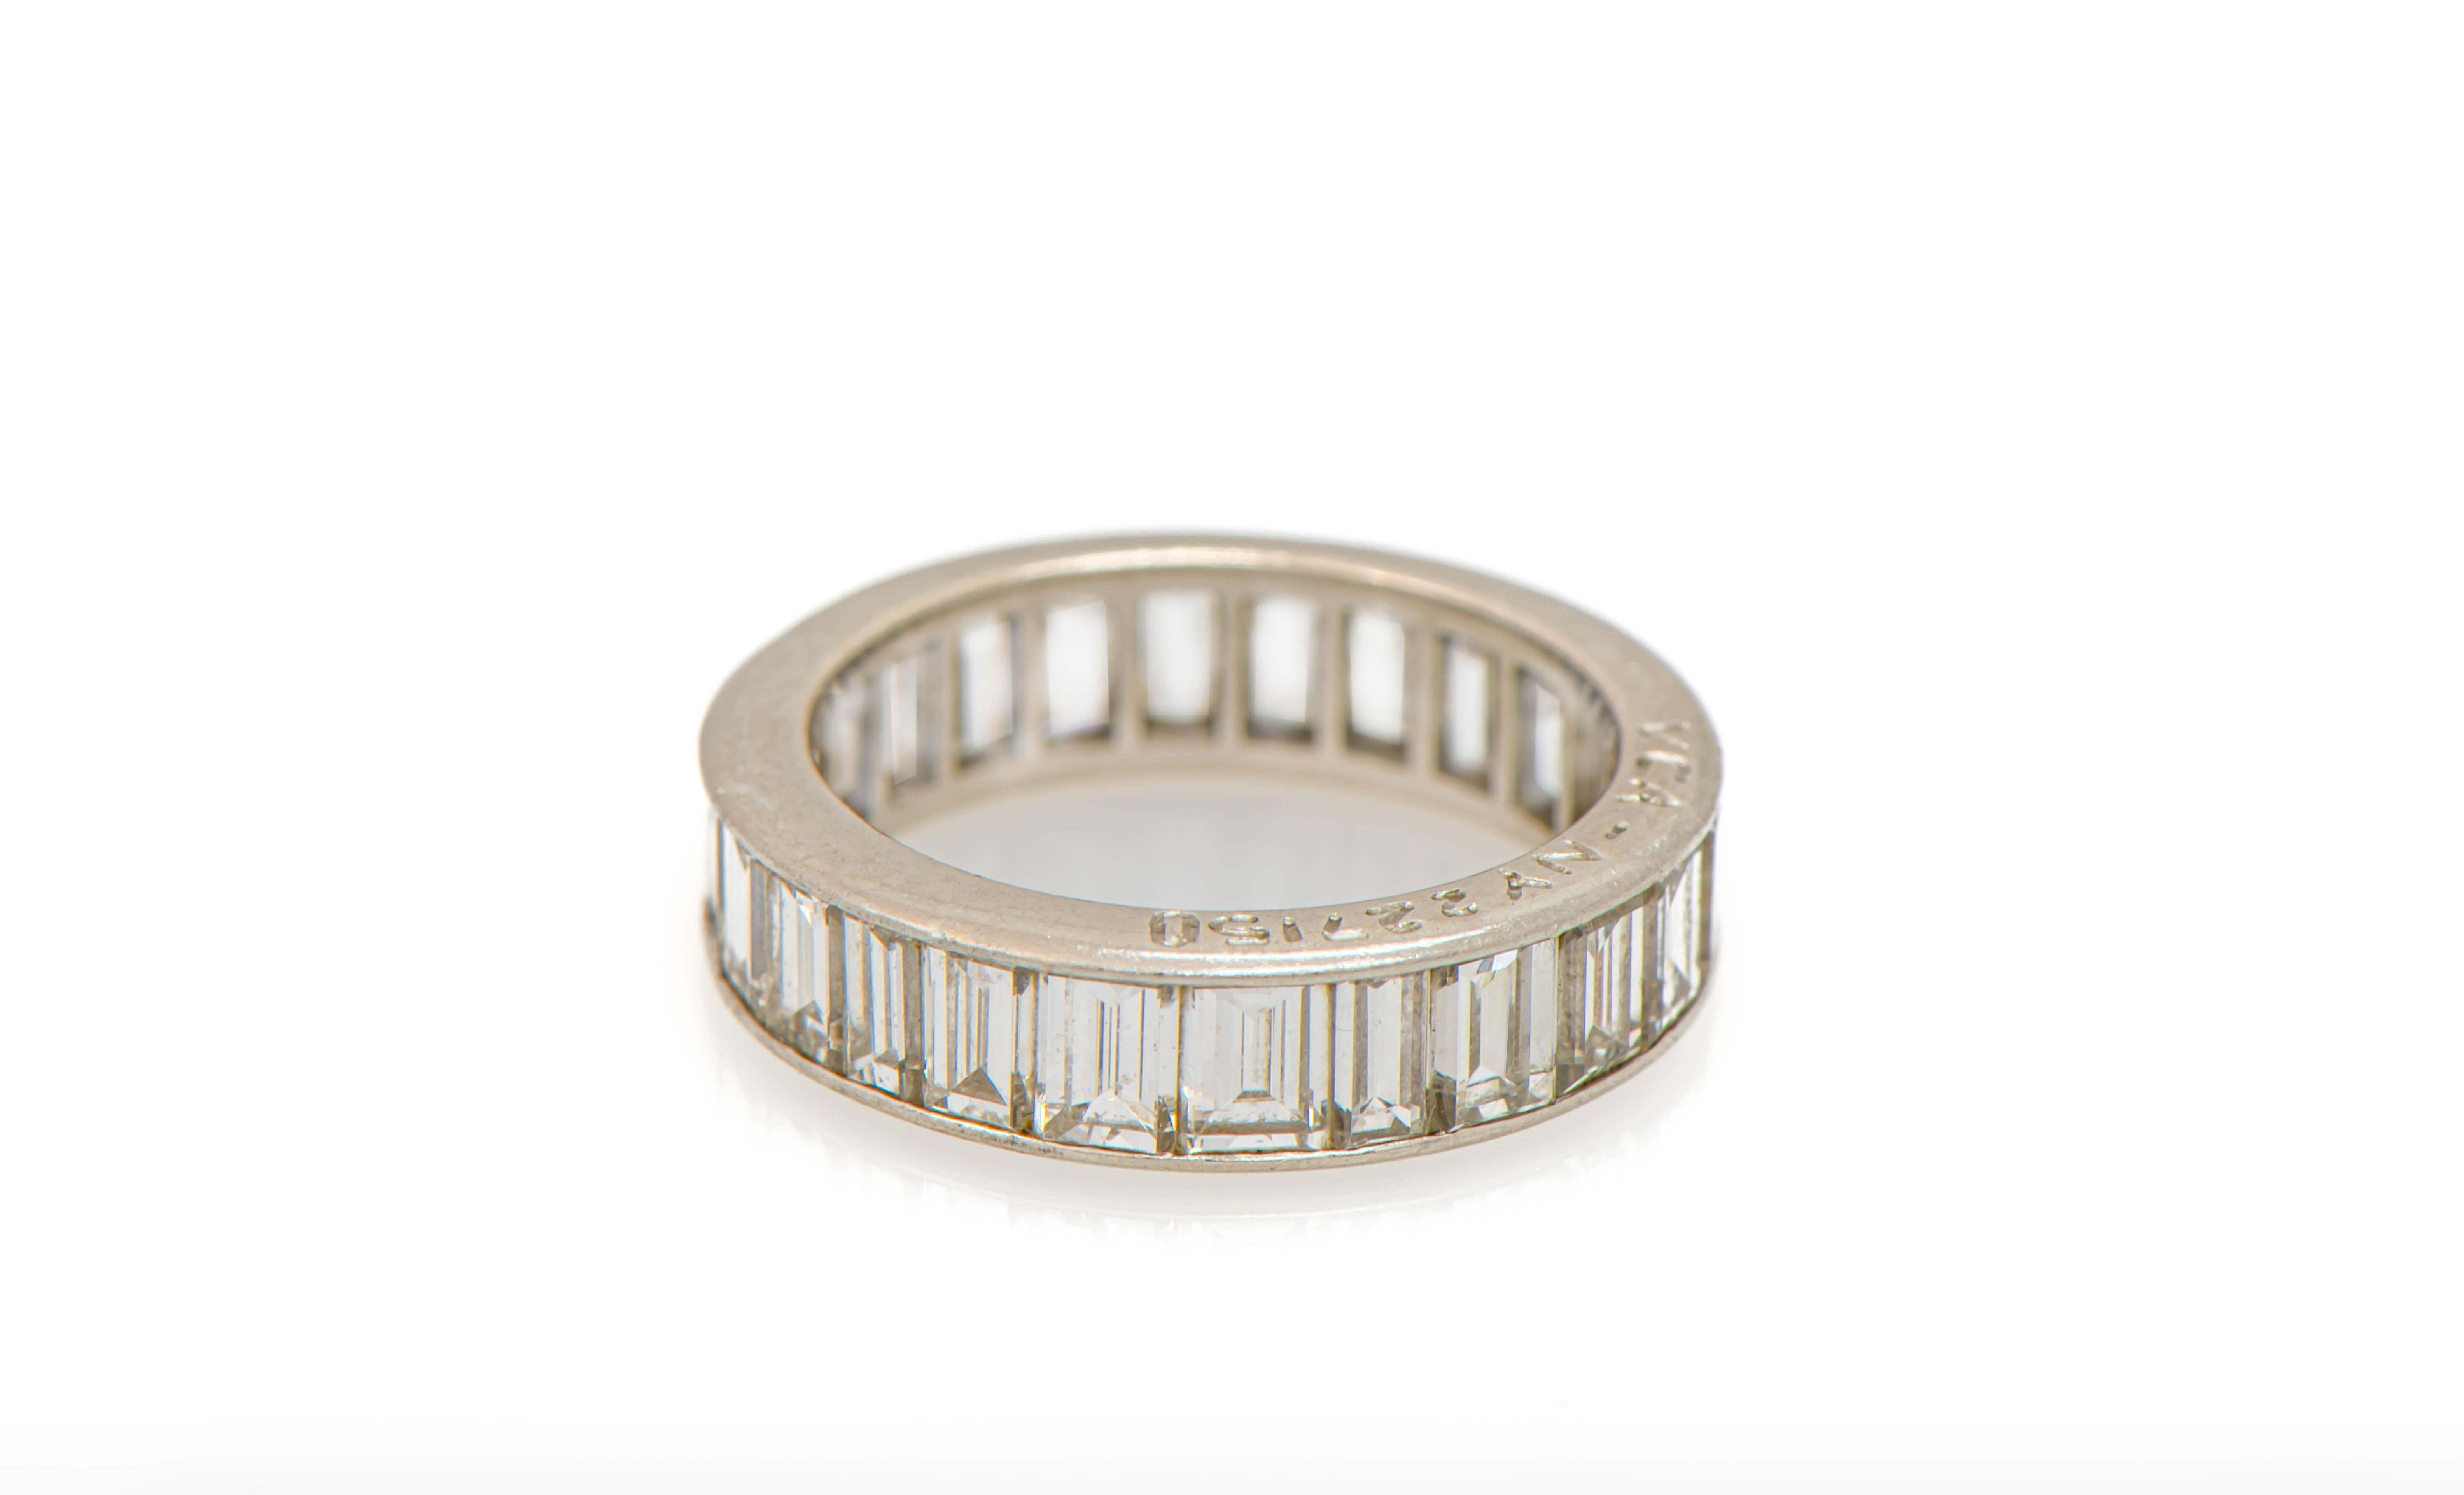 Van Cleef & Arpels Emerald Cut Diamond Eternity Band, 

24 emerald cut diamonds set in platinum. 

Total Approximate Diamond Weight: 3.39 carats

Ring Size: 4.75

Signed VCA NY & numbered 